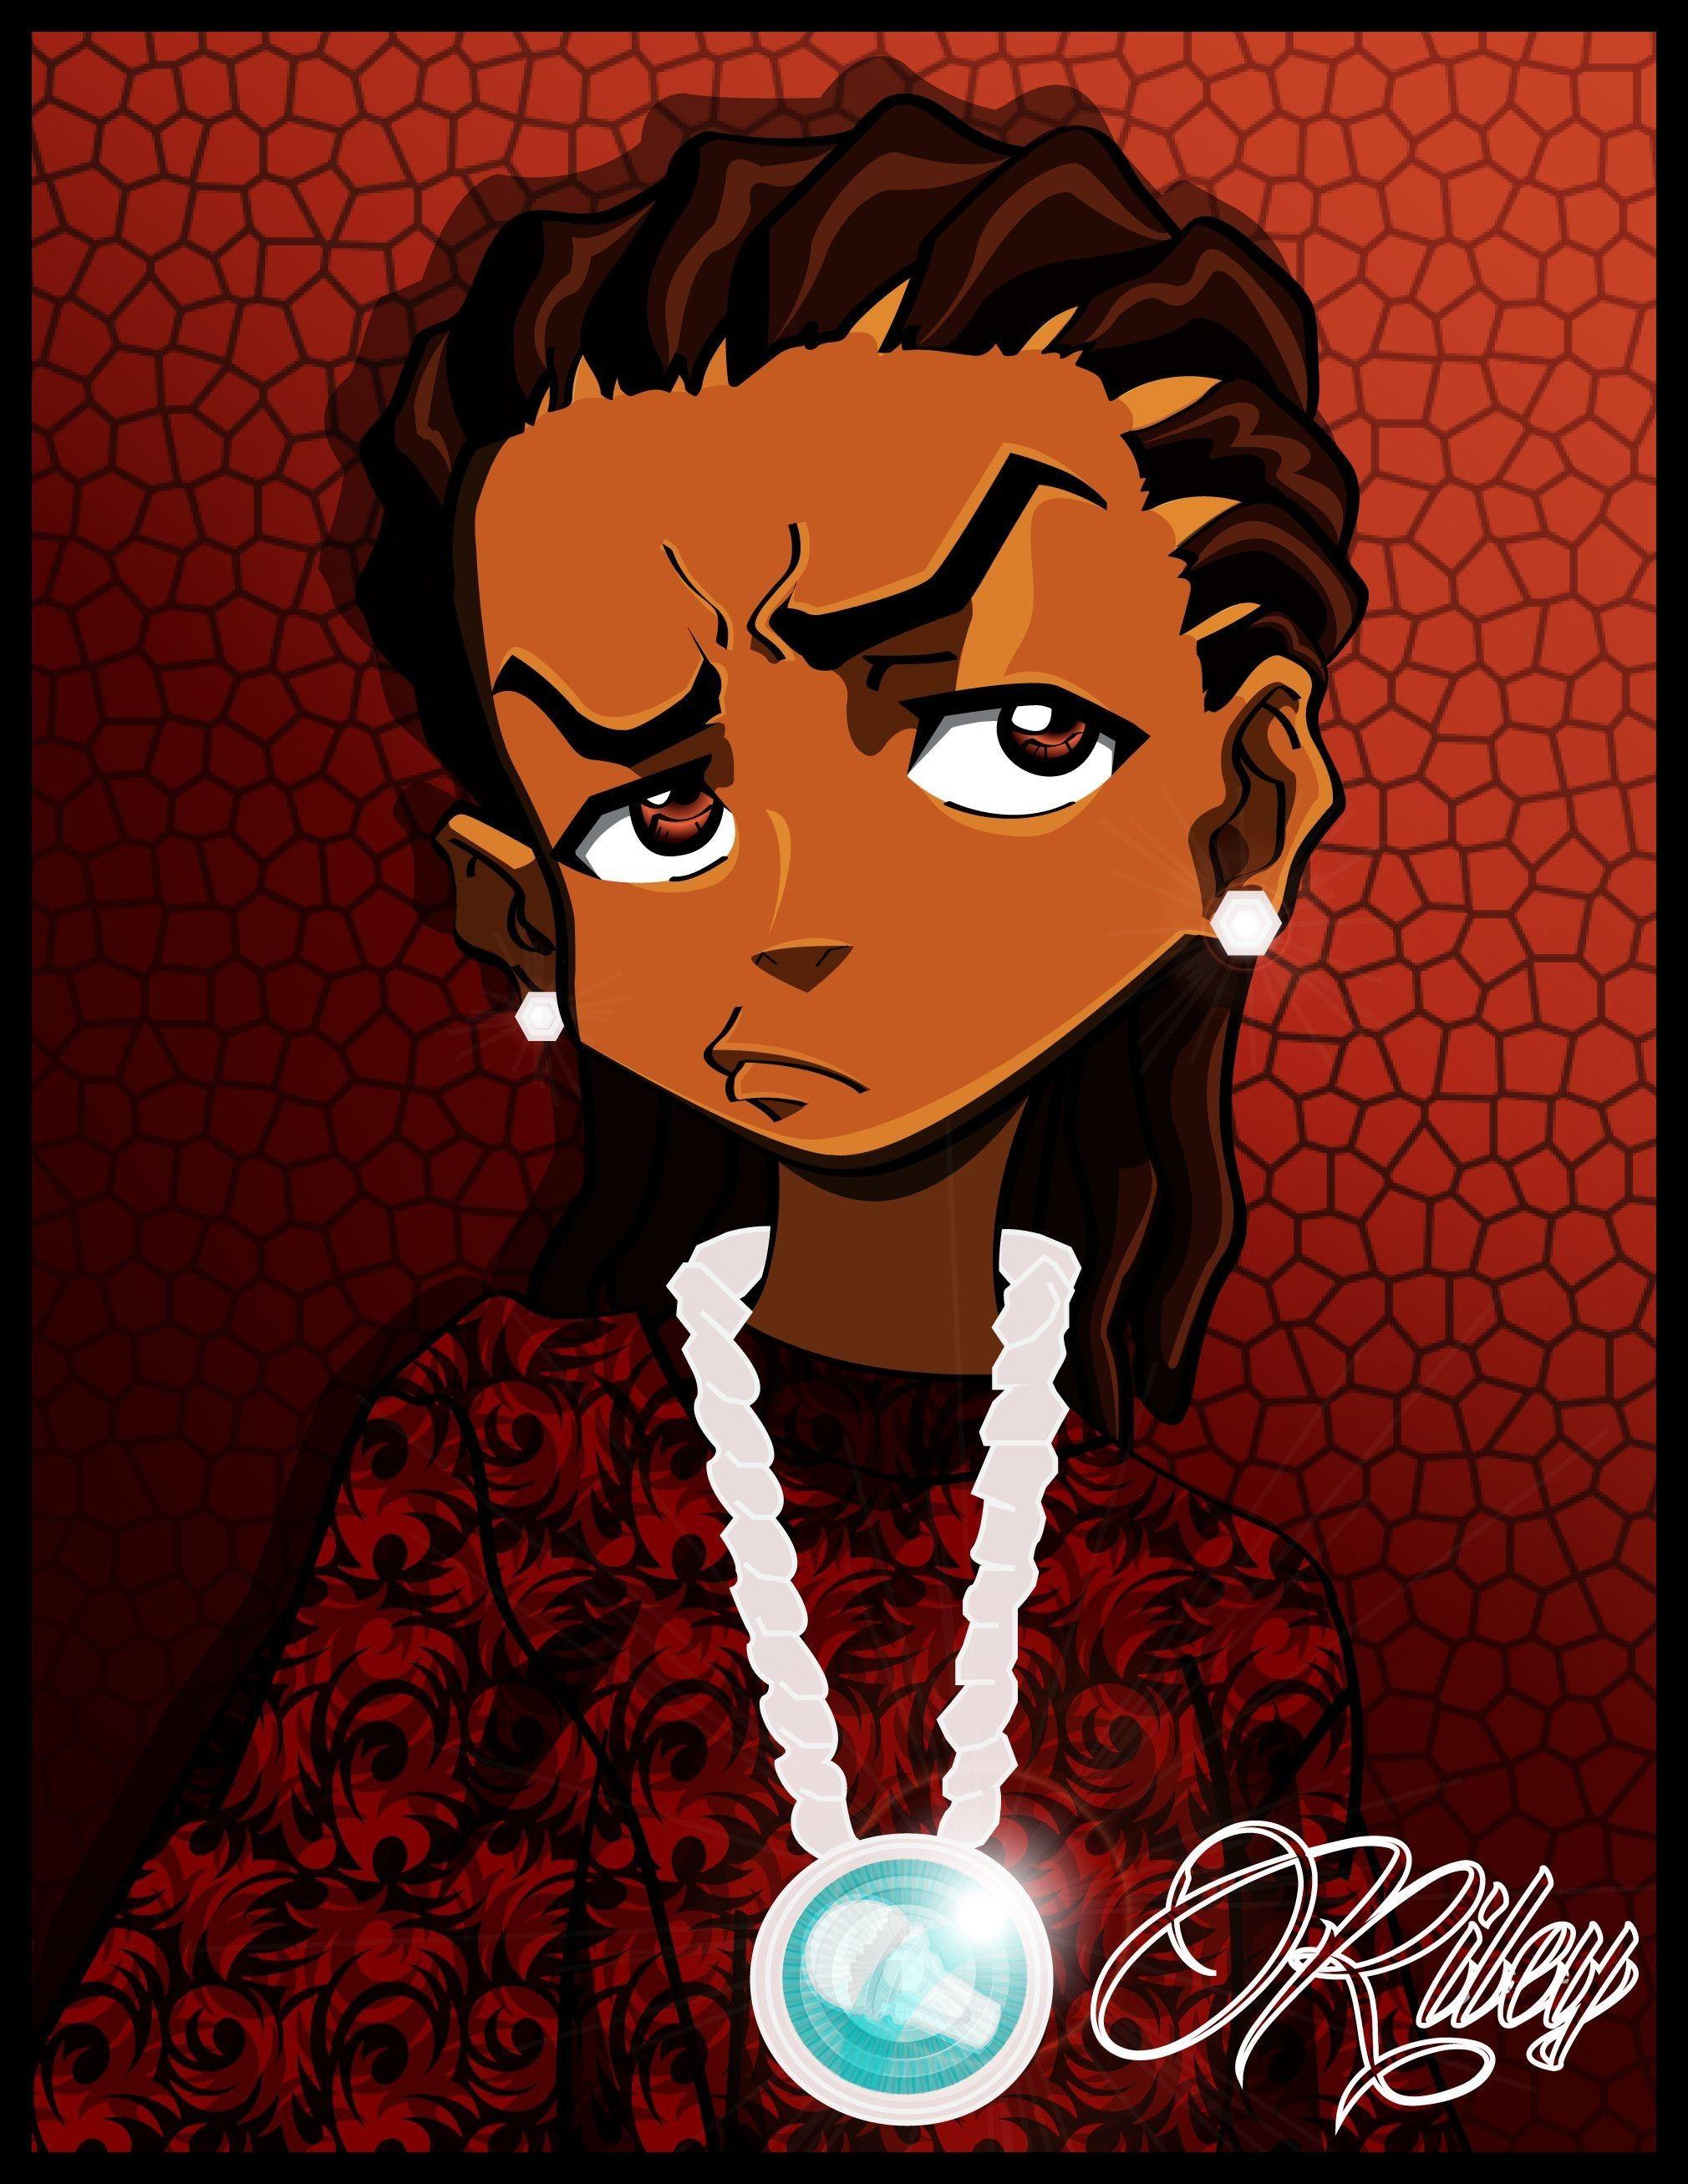 Download The Boondocks wallpapers for mobile phone free The Boondocks  HD pictures